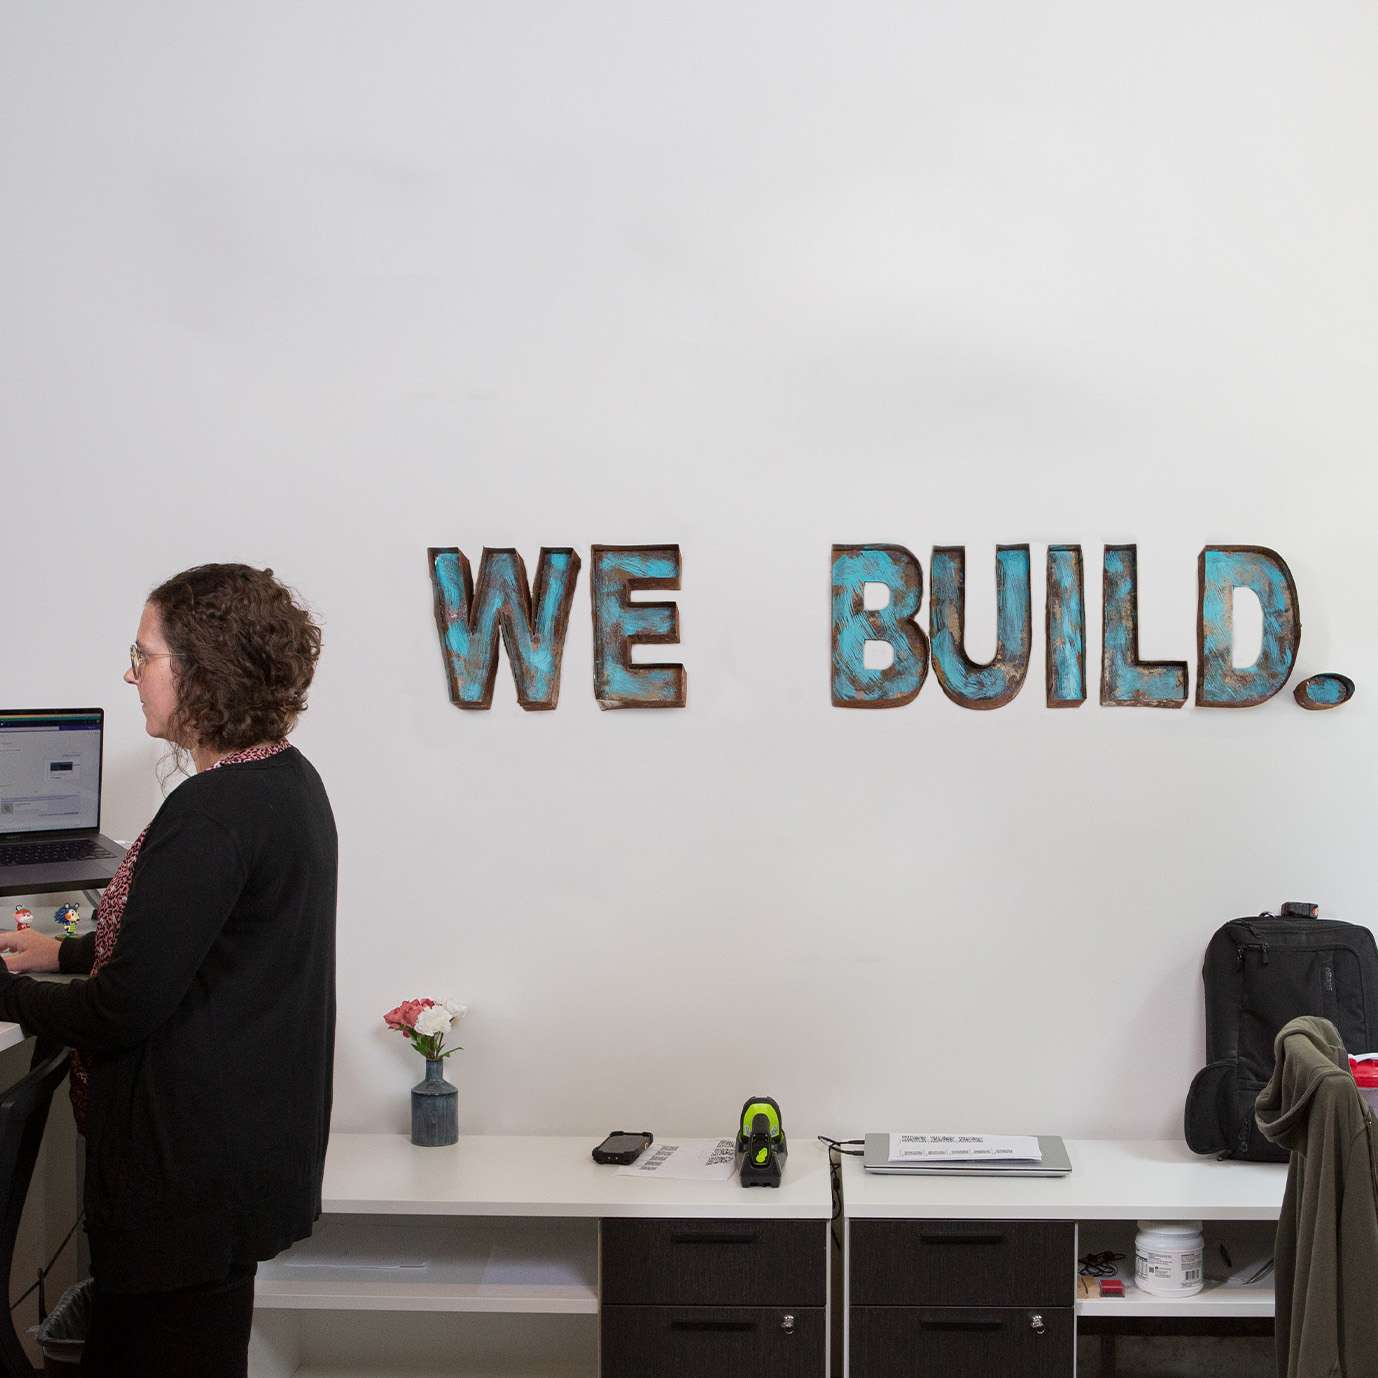 Woman working at a standing desk with We Build sign in the background